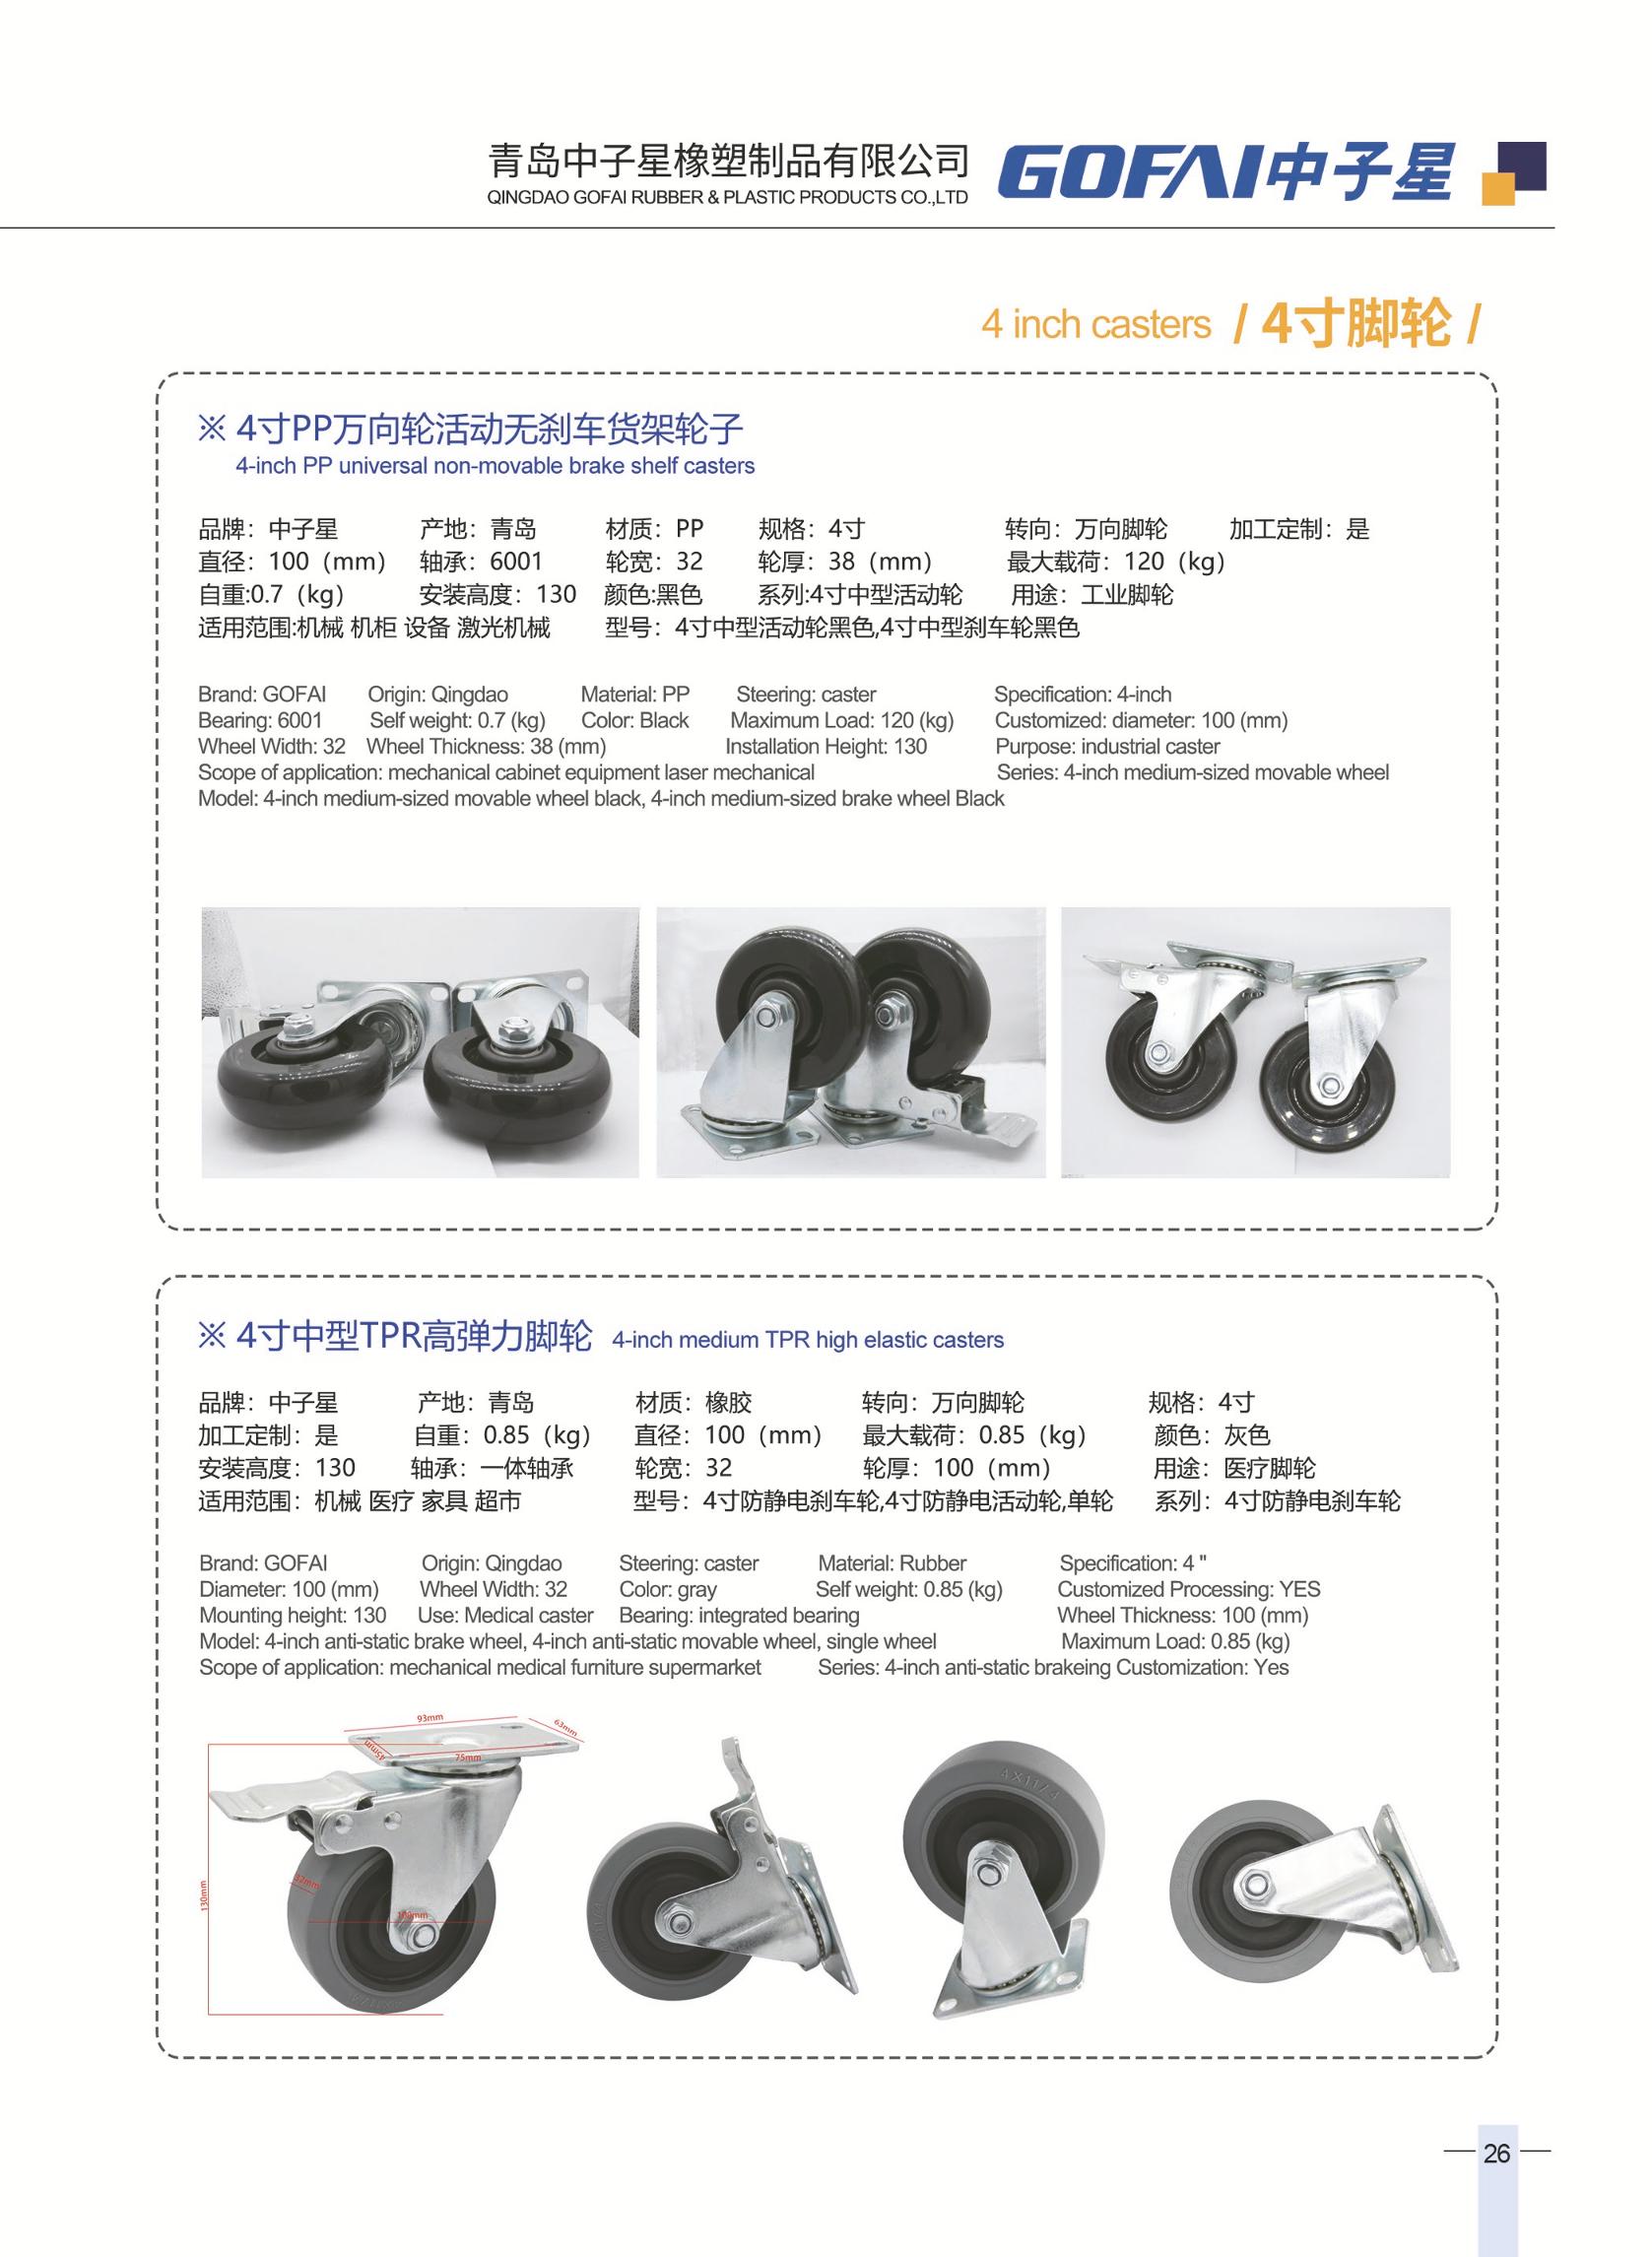 Gofai based foot cups and caster wheels_28.jpg